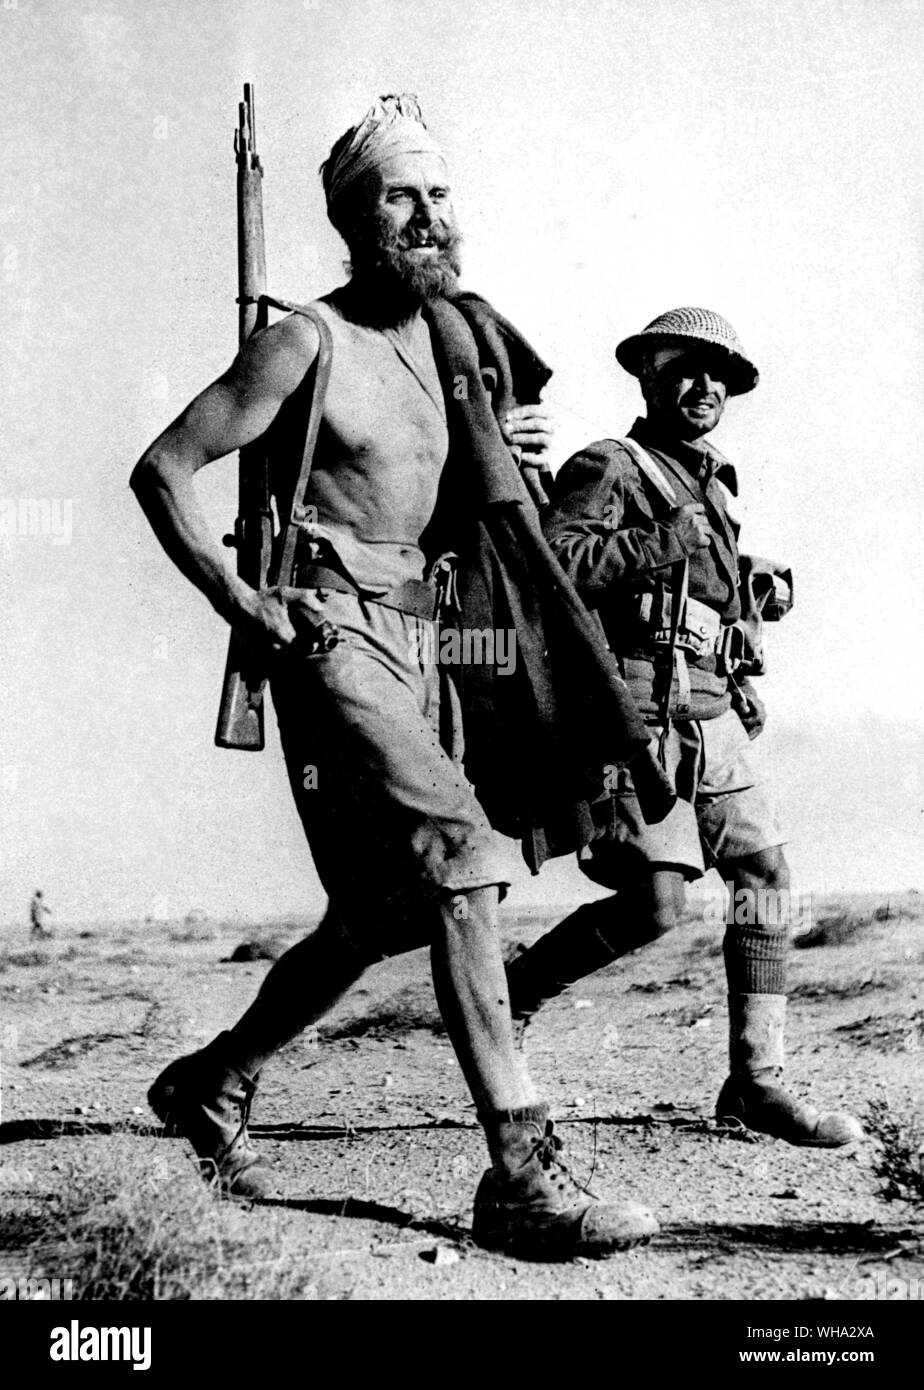 WW1: This bearded warrior wore no shirt but carried his great coat as he marched in with a British soldier. Stock Photo